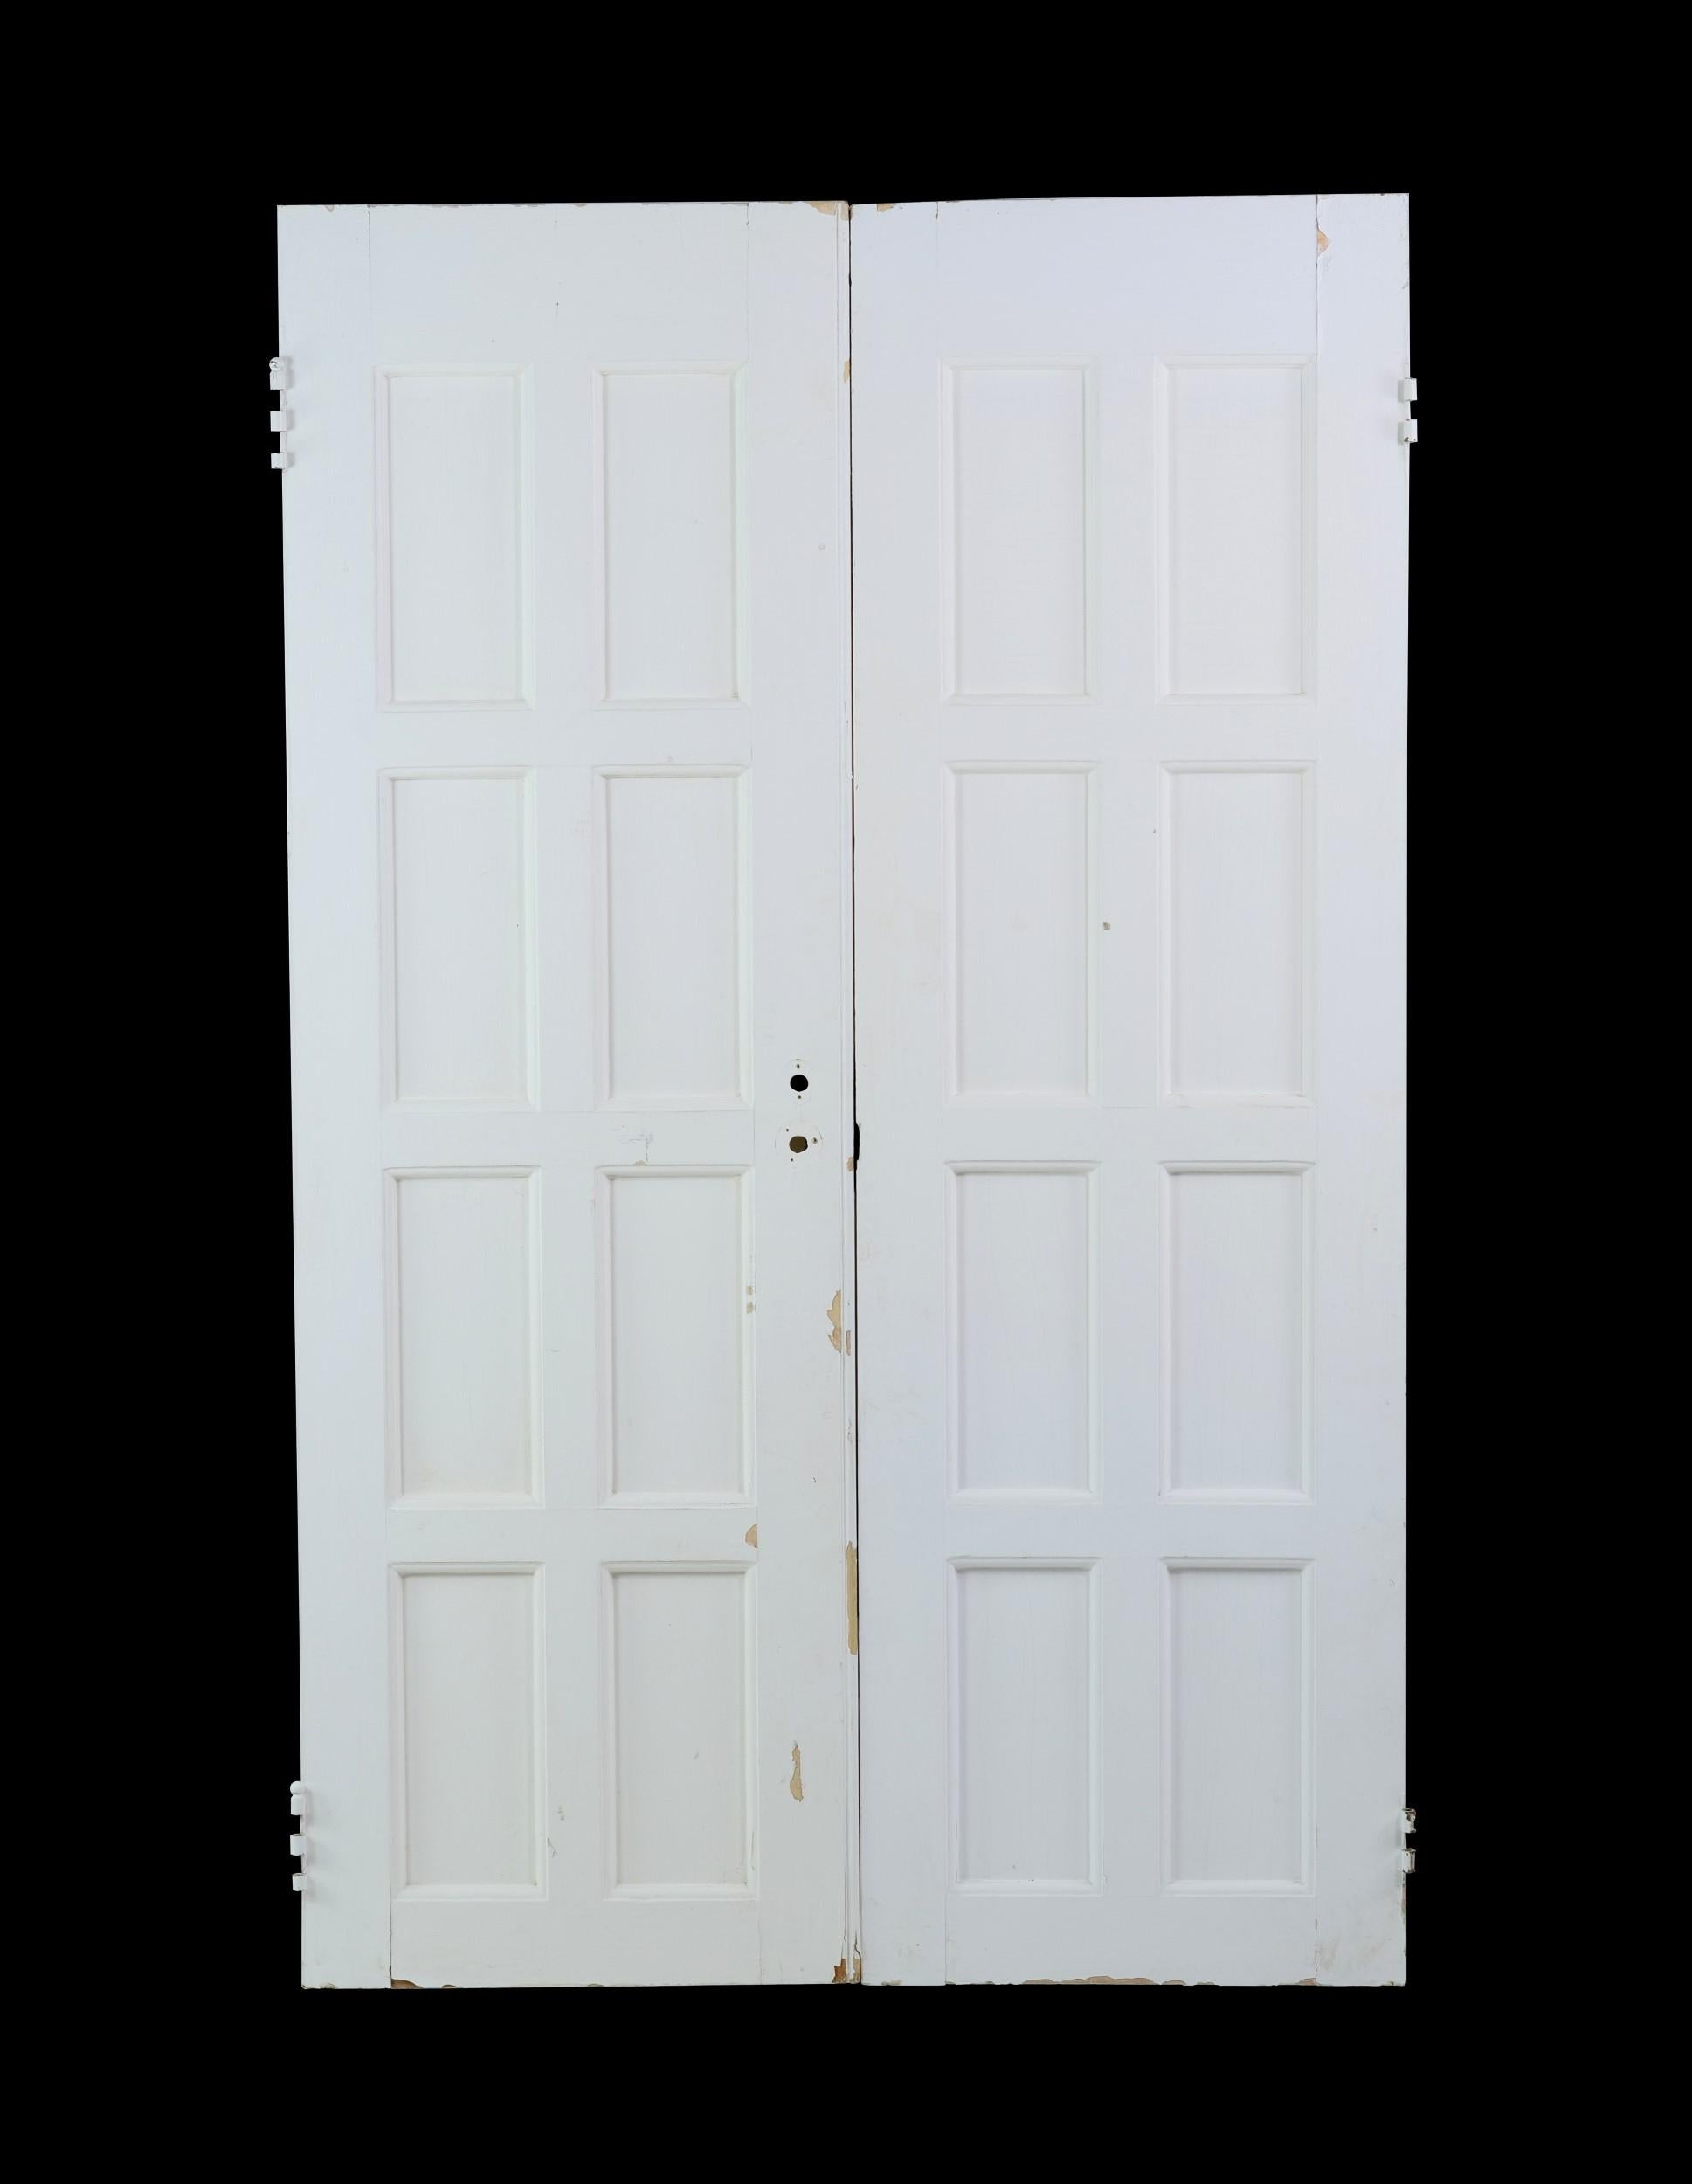 Antique set of wood double doors featuring 8 recessed vertical panes each. They are painted white and have some chipping. Please see photos. Priced as a double. Priced as a set of 2. Measures: 67